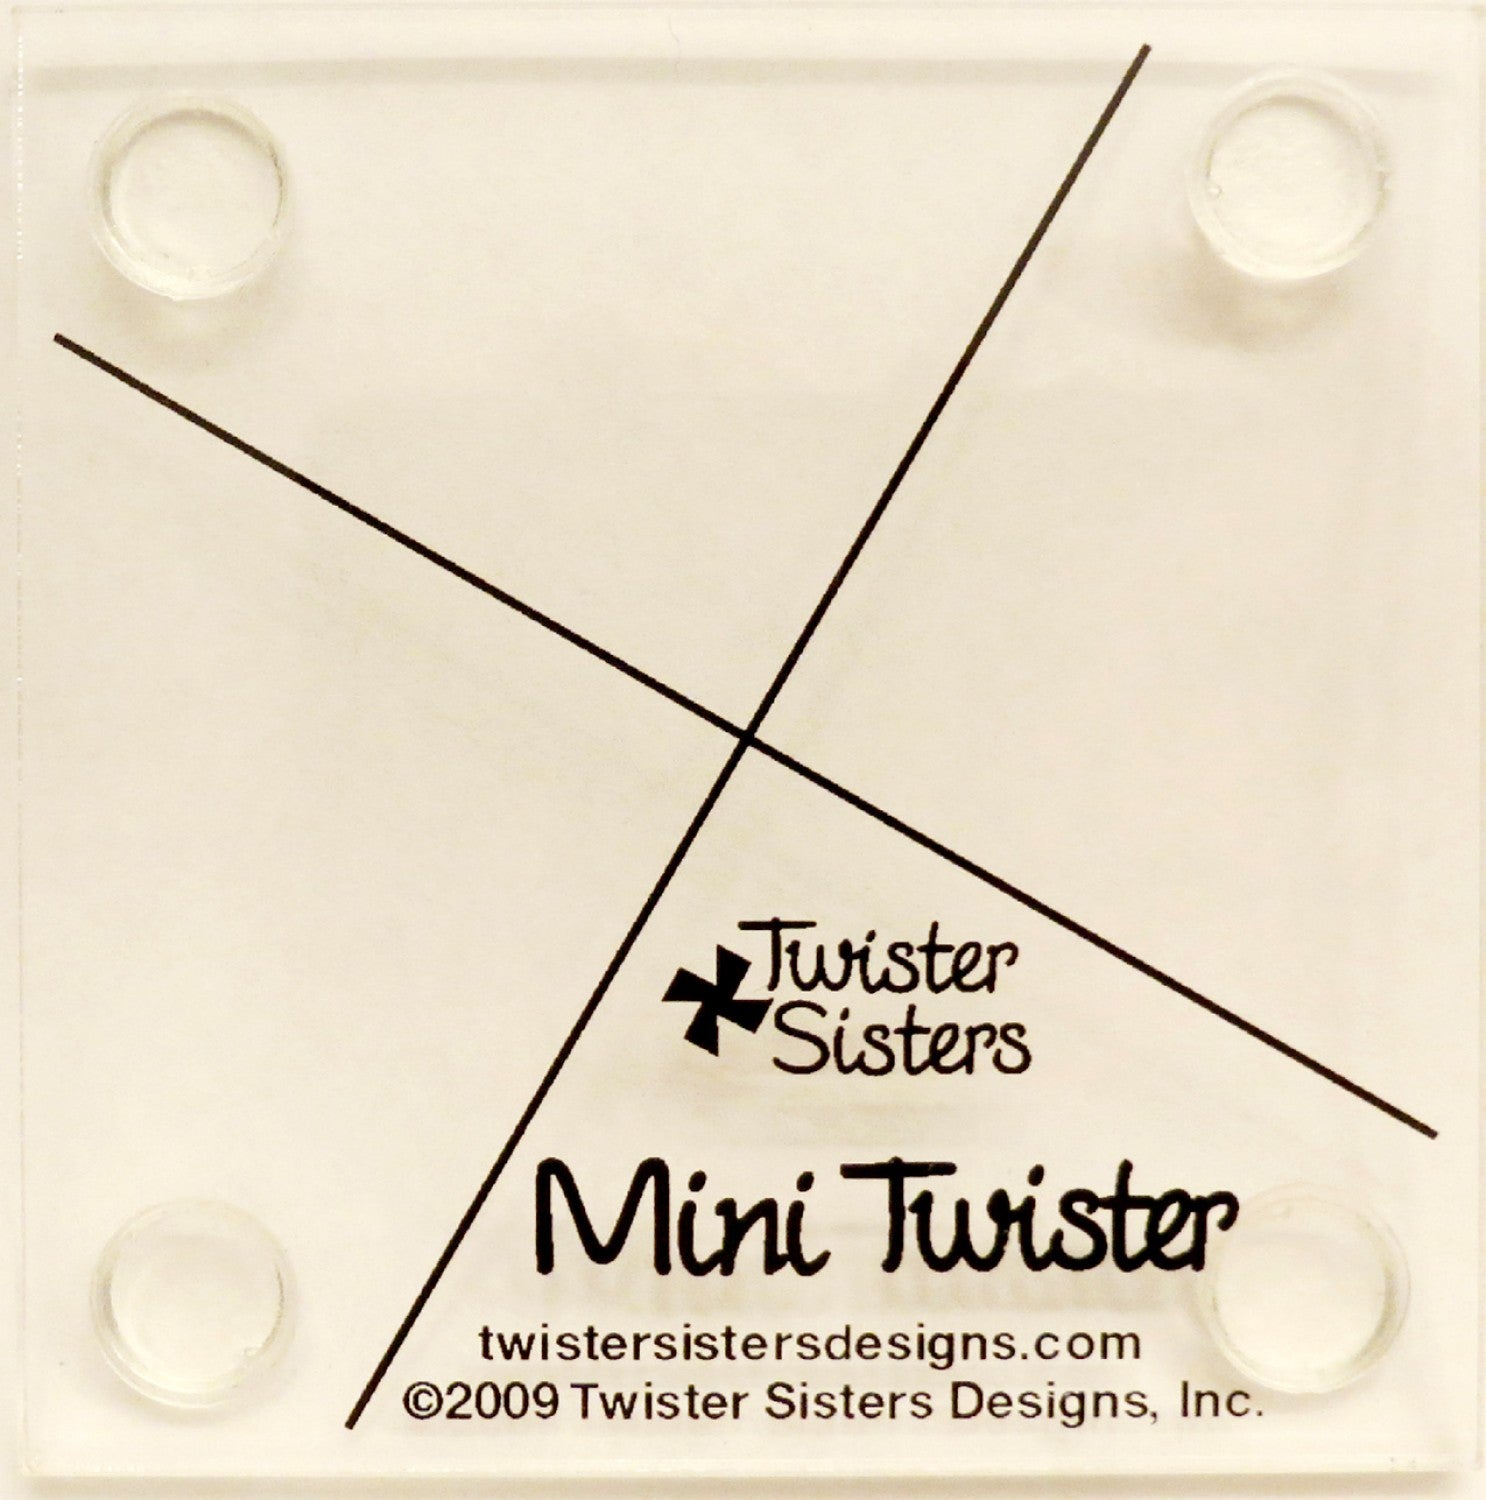 Mini Twister Tool Quilt Template by Marsha Bergren for Twister Sisters